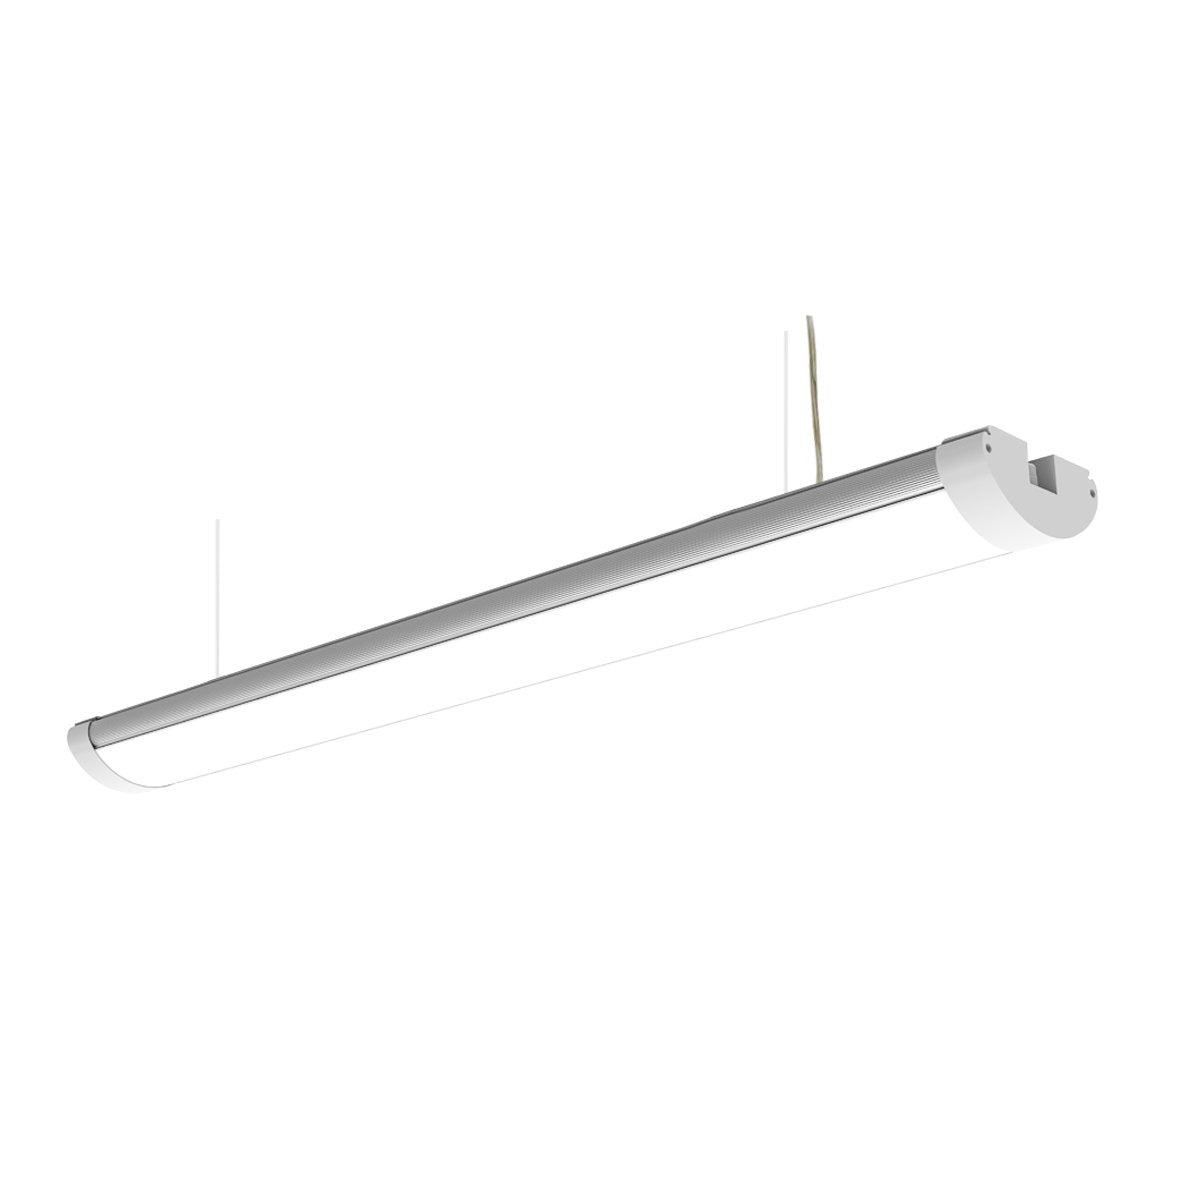 Office Pendant Lighting Fixtures: Dimmable 4ft 40w 2700k Soft Warm - Led Light Canada